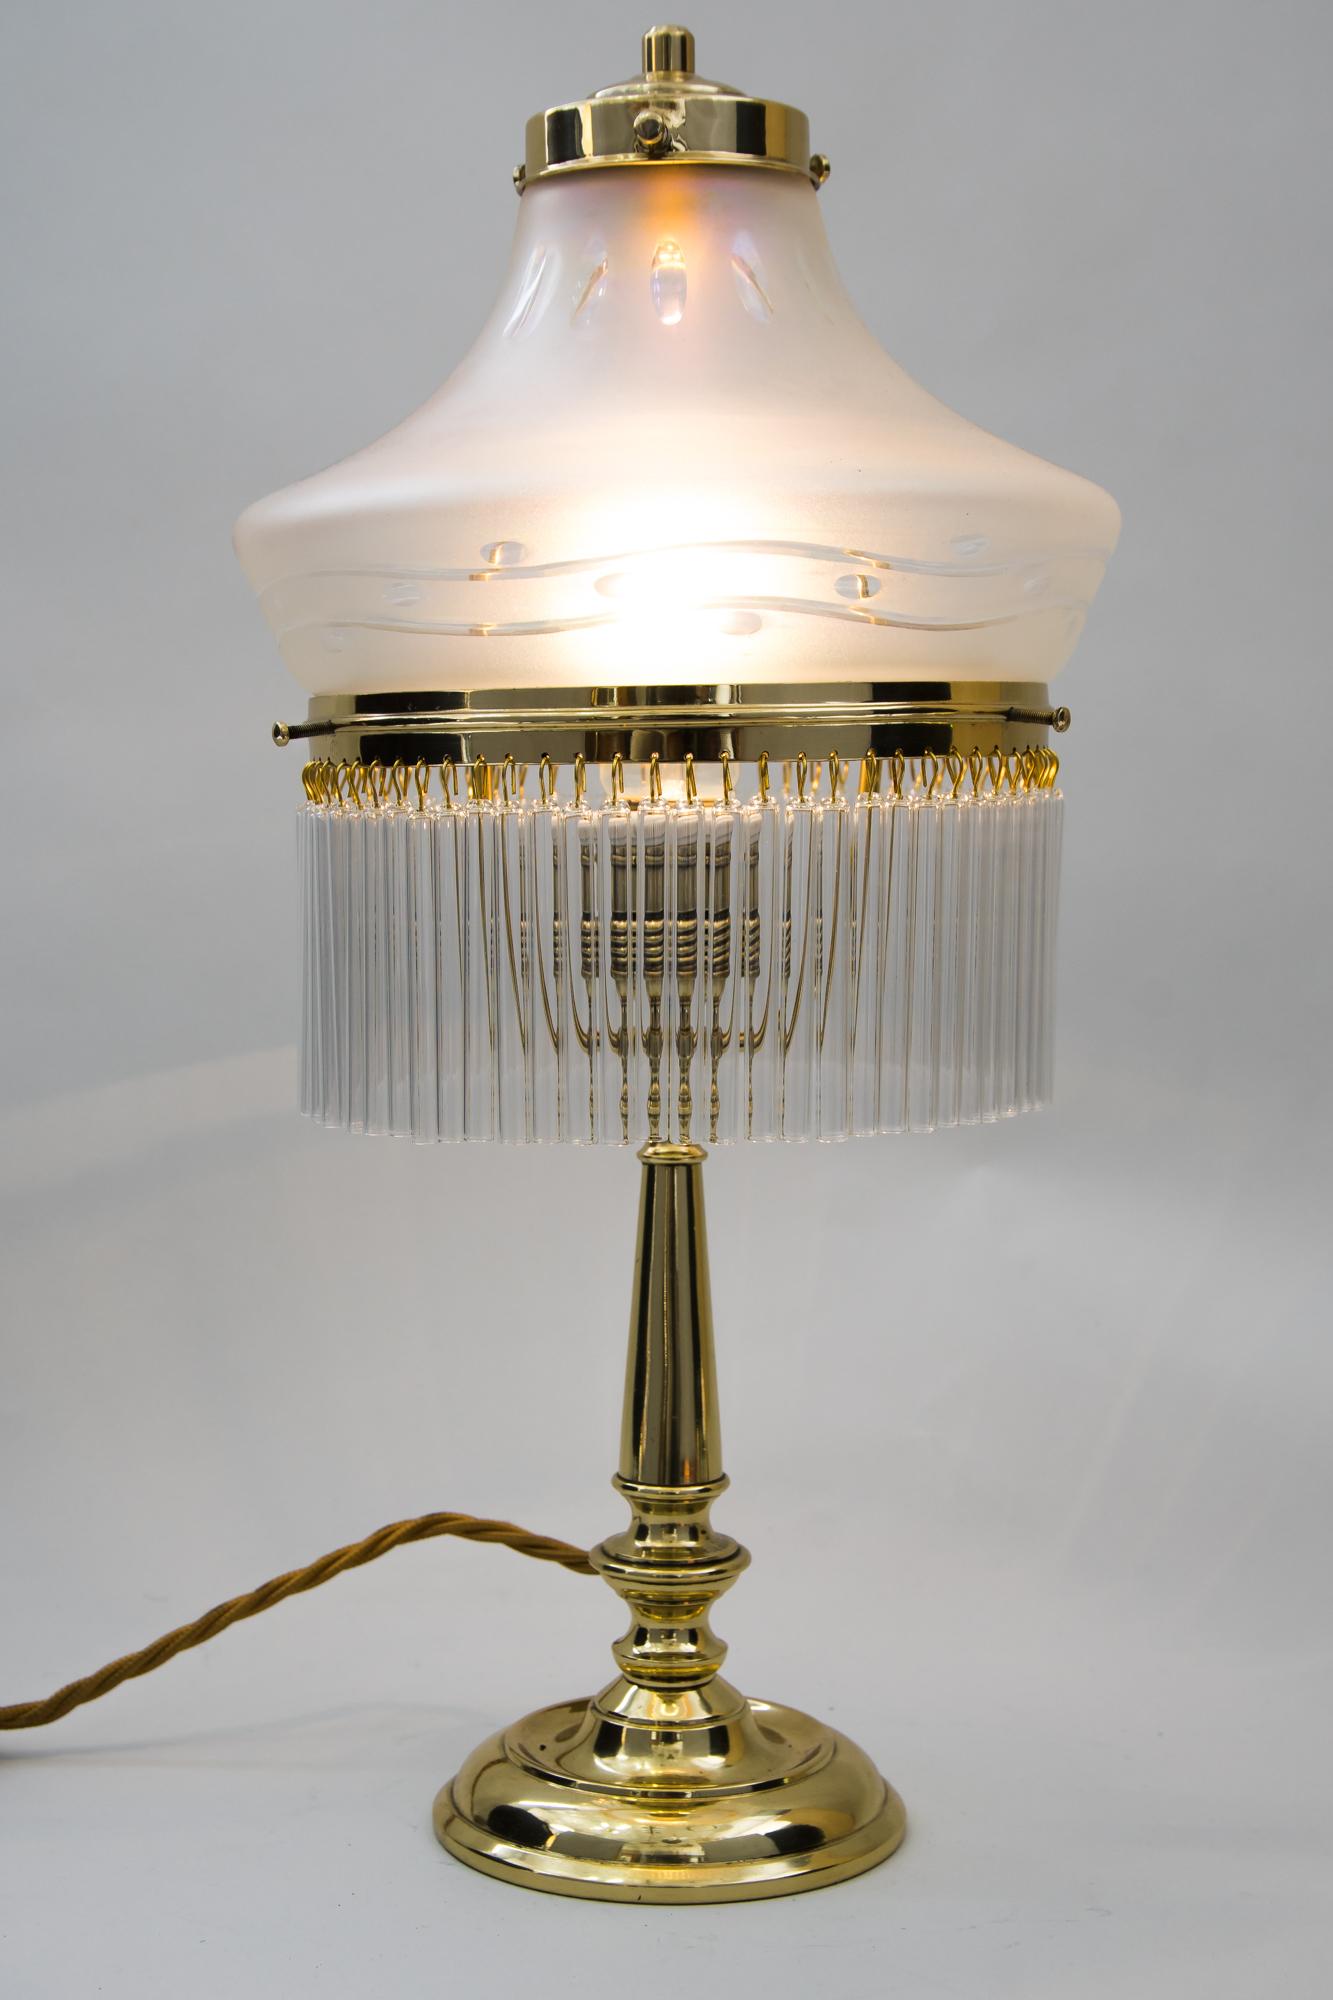 Art Deco table lamp, Vienna, circa 1920s
Brass polished and stove enameled
Original glass shade
Glass sticks are replaced.